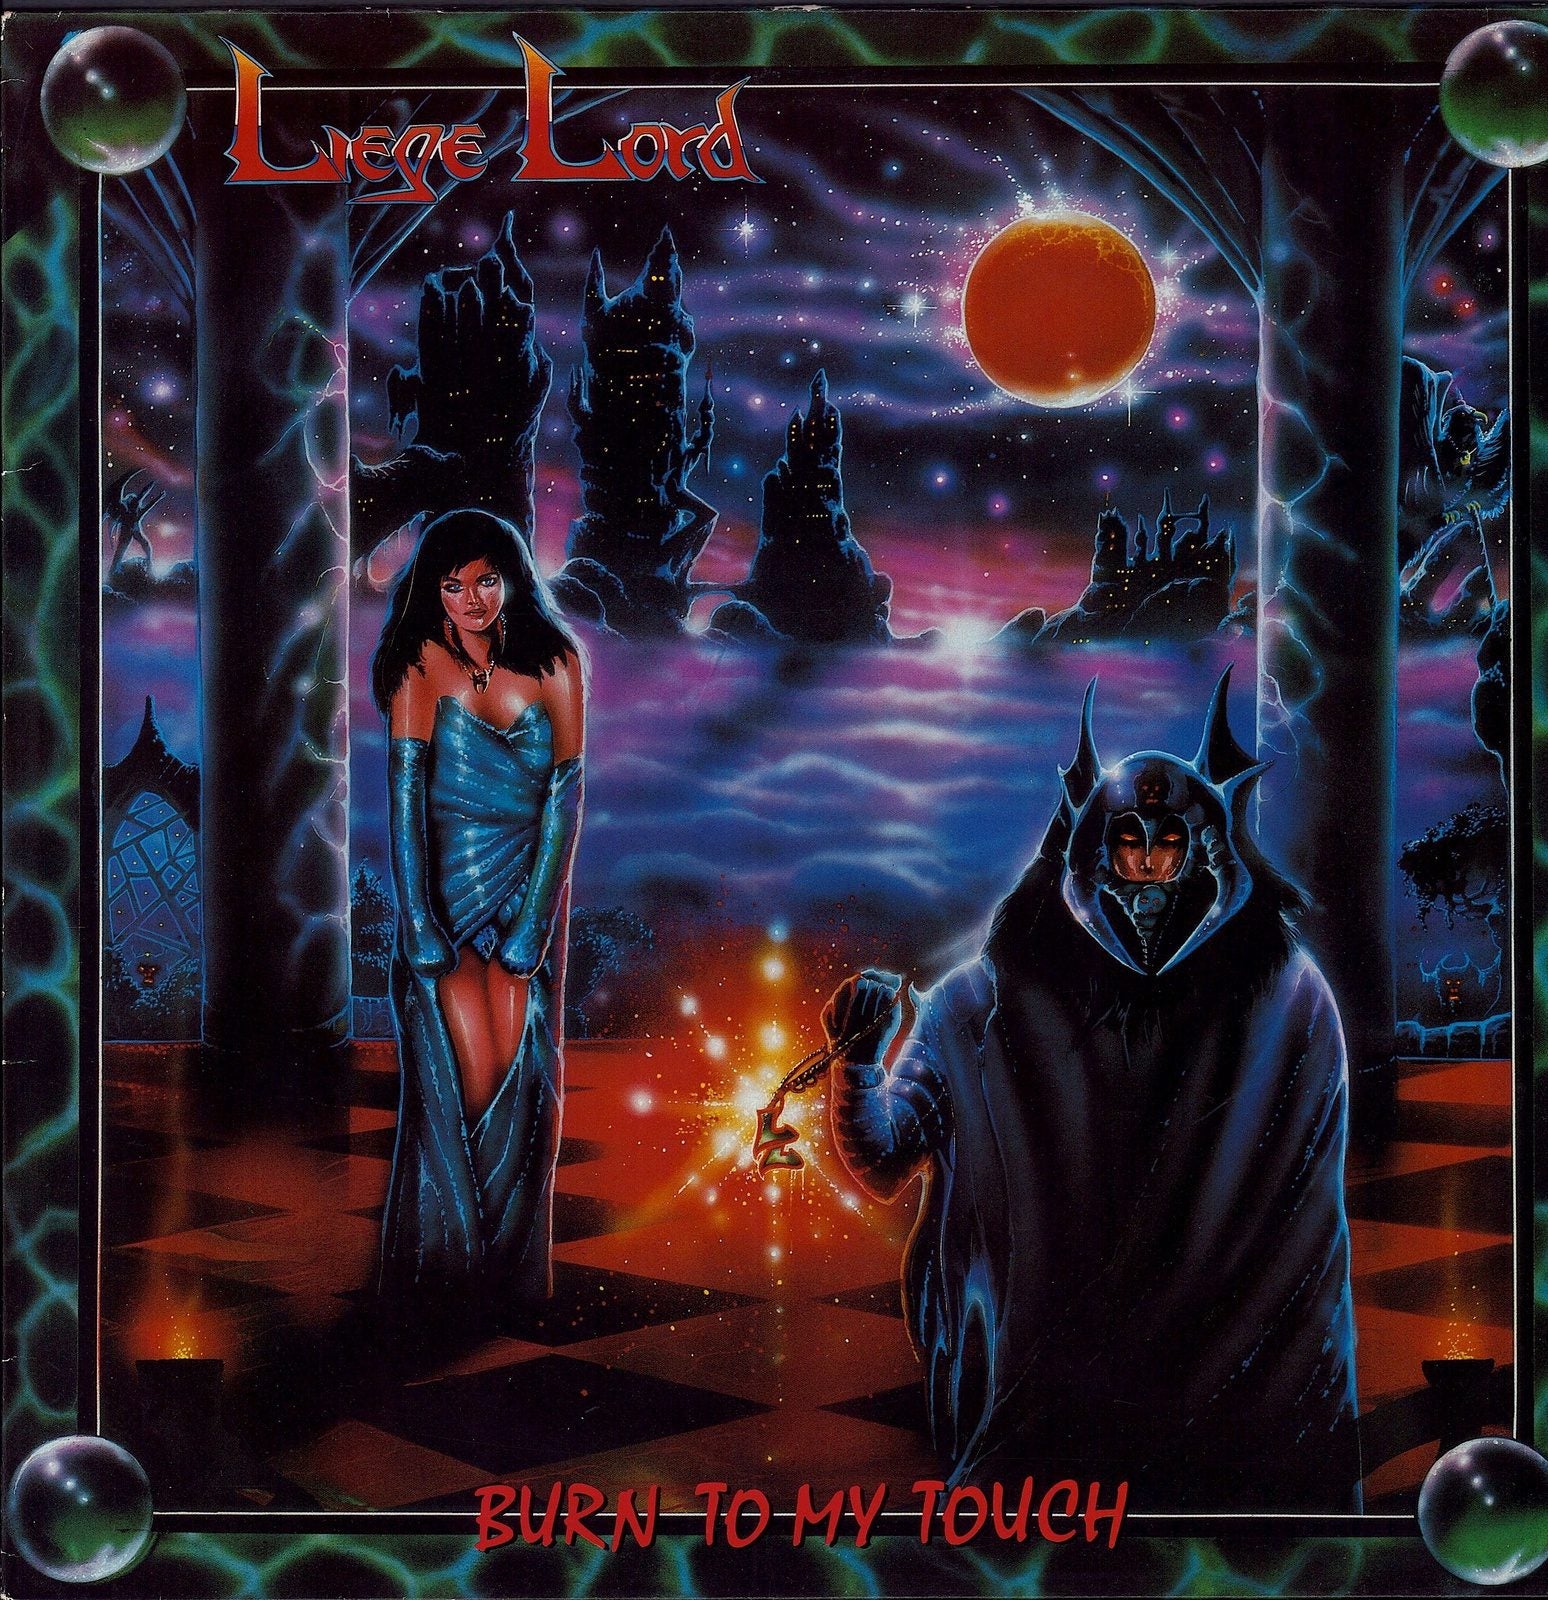 Liege Lord - Burn To My Touch Vinyl LP